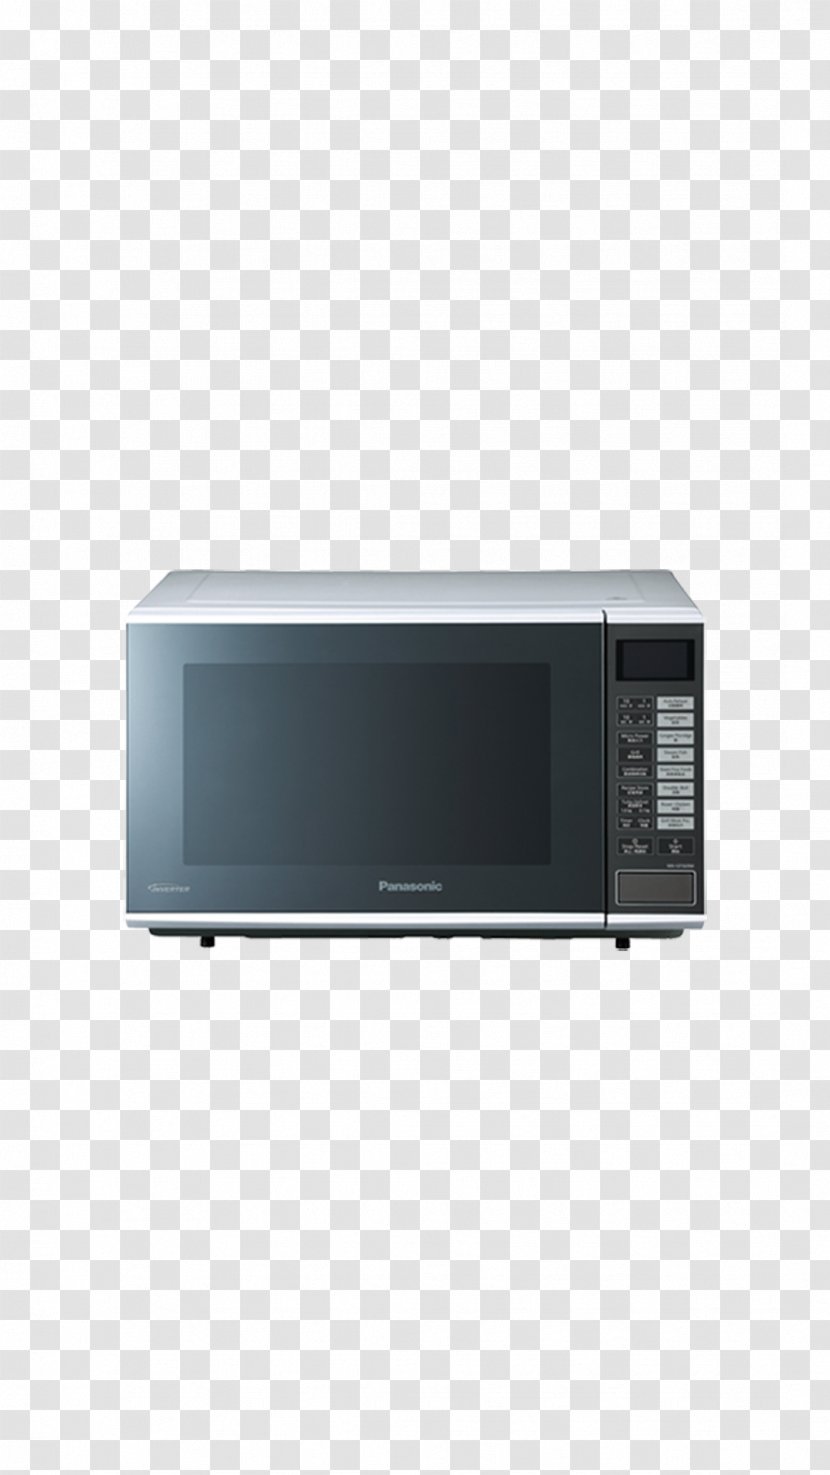 Panasonic Microwave Ovens Convection Kitchen - Oven Transparent PNG